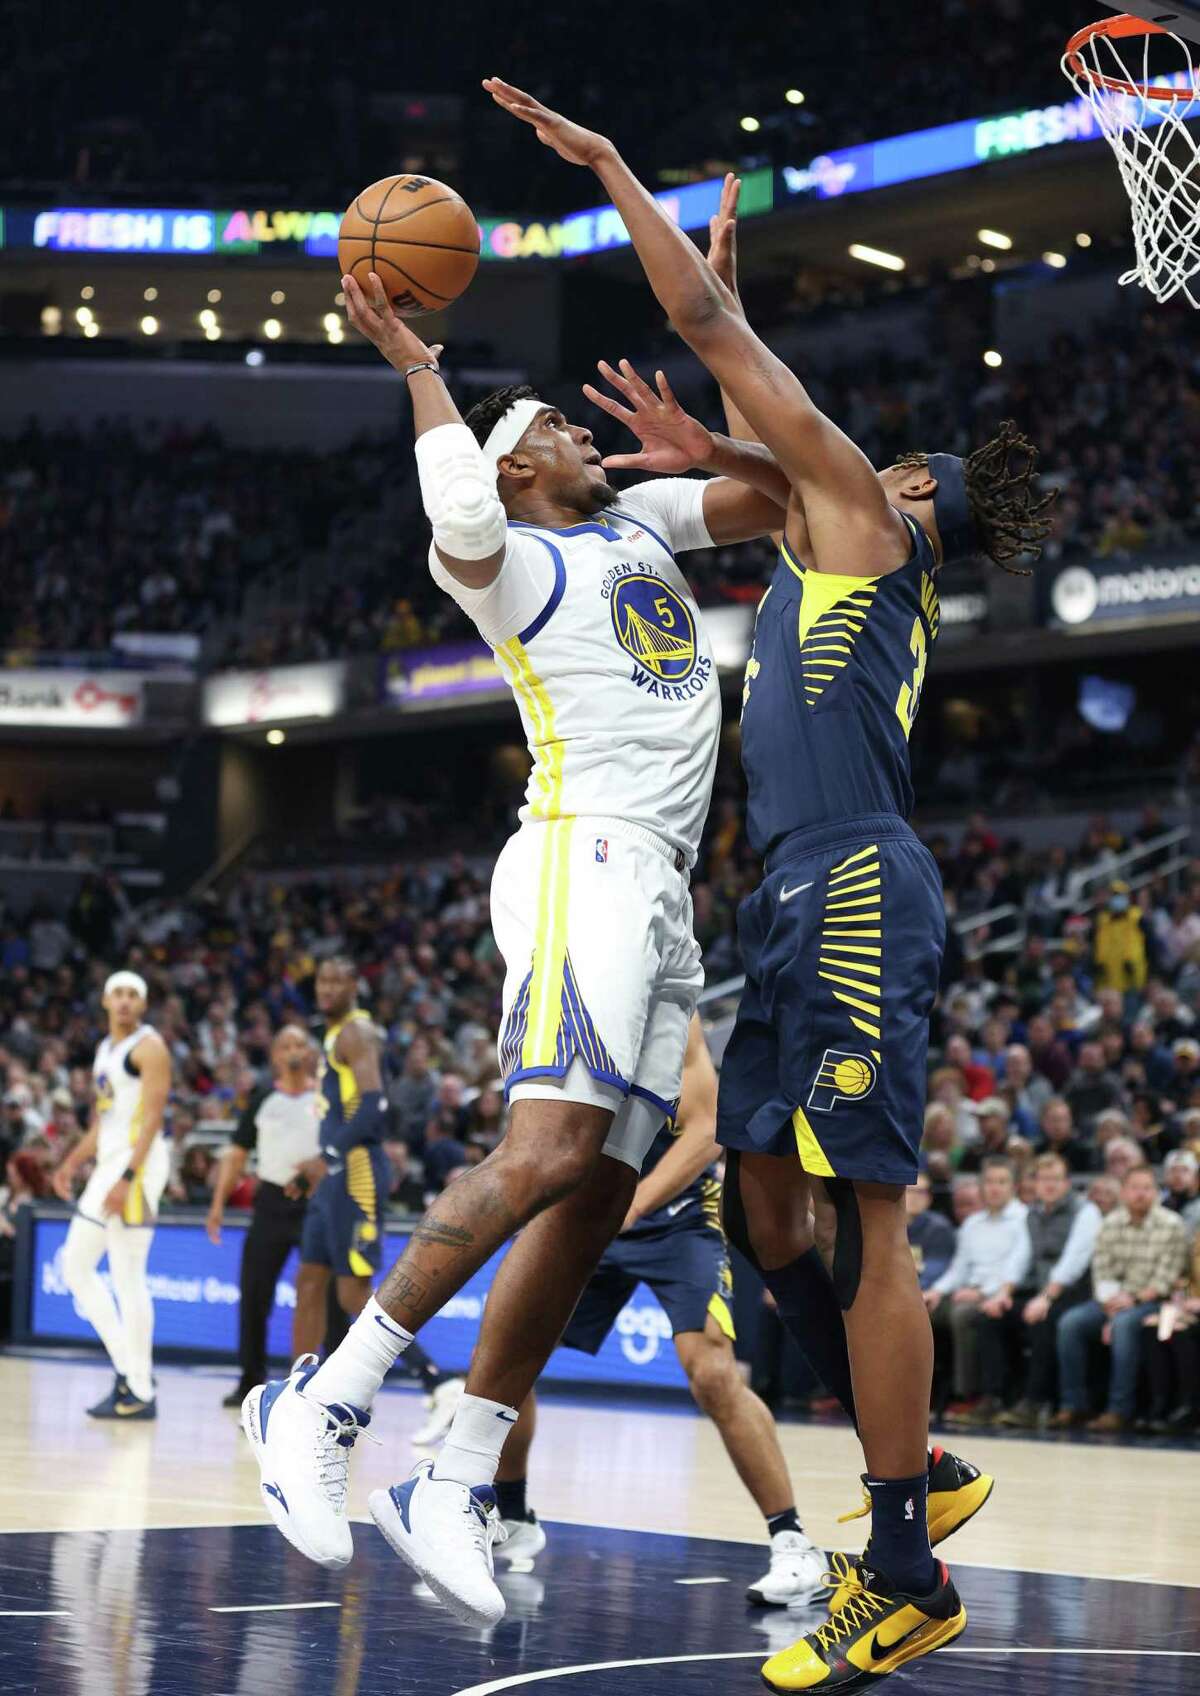 Kevon Looney #5 of the Golden State Warriors shoots the ball against the Indiana Pacers at Gainbridge Fieldhouse on December 13, 2021 in Indianapolis, Indiana.